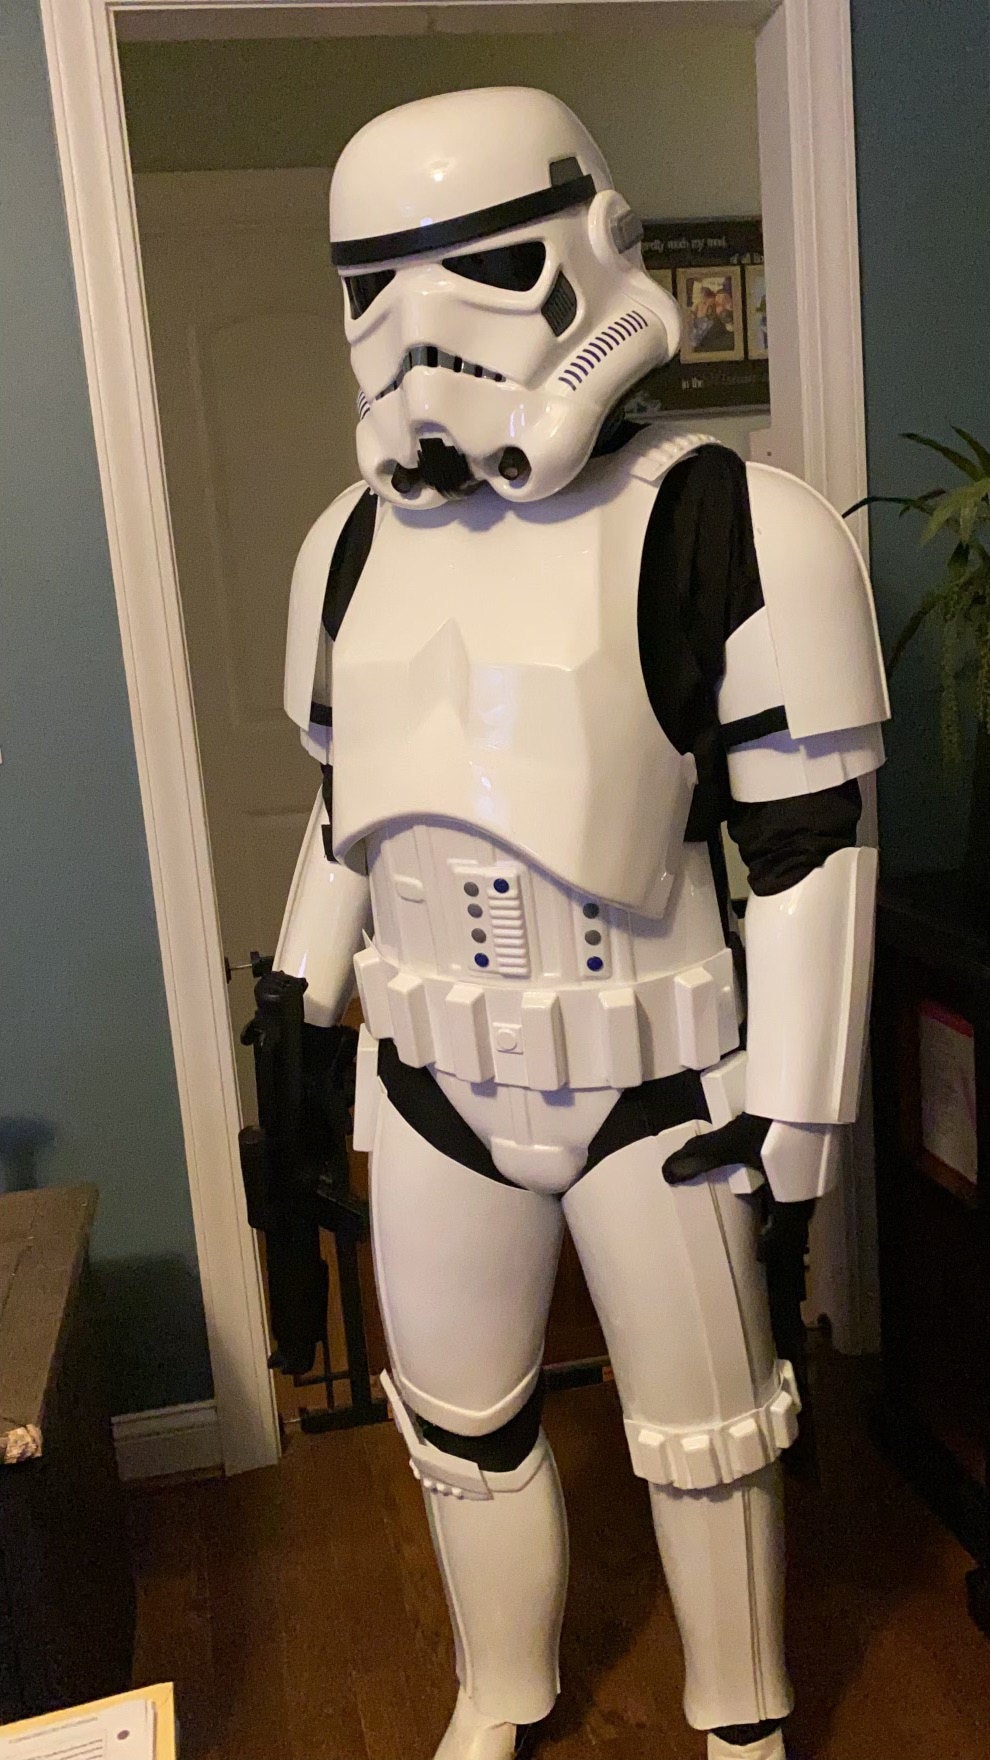 Stormtrooper Armour Review from MJ